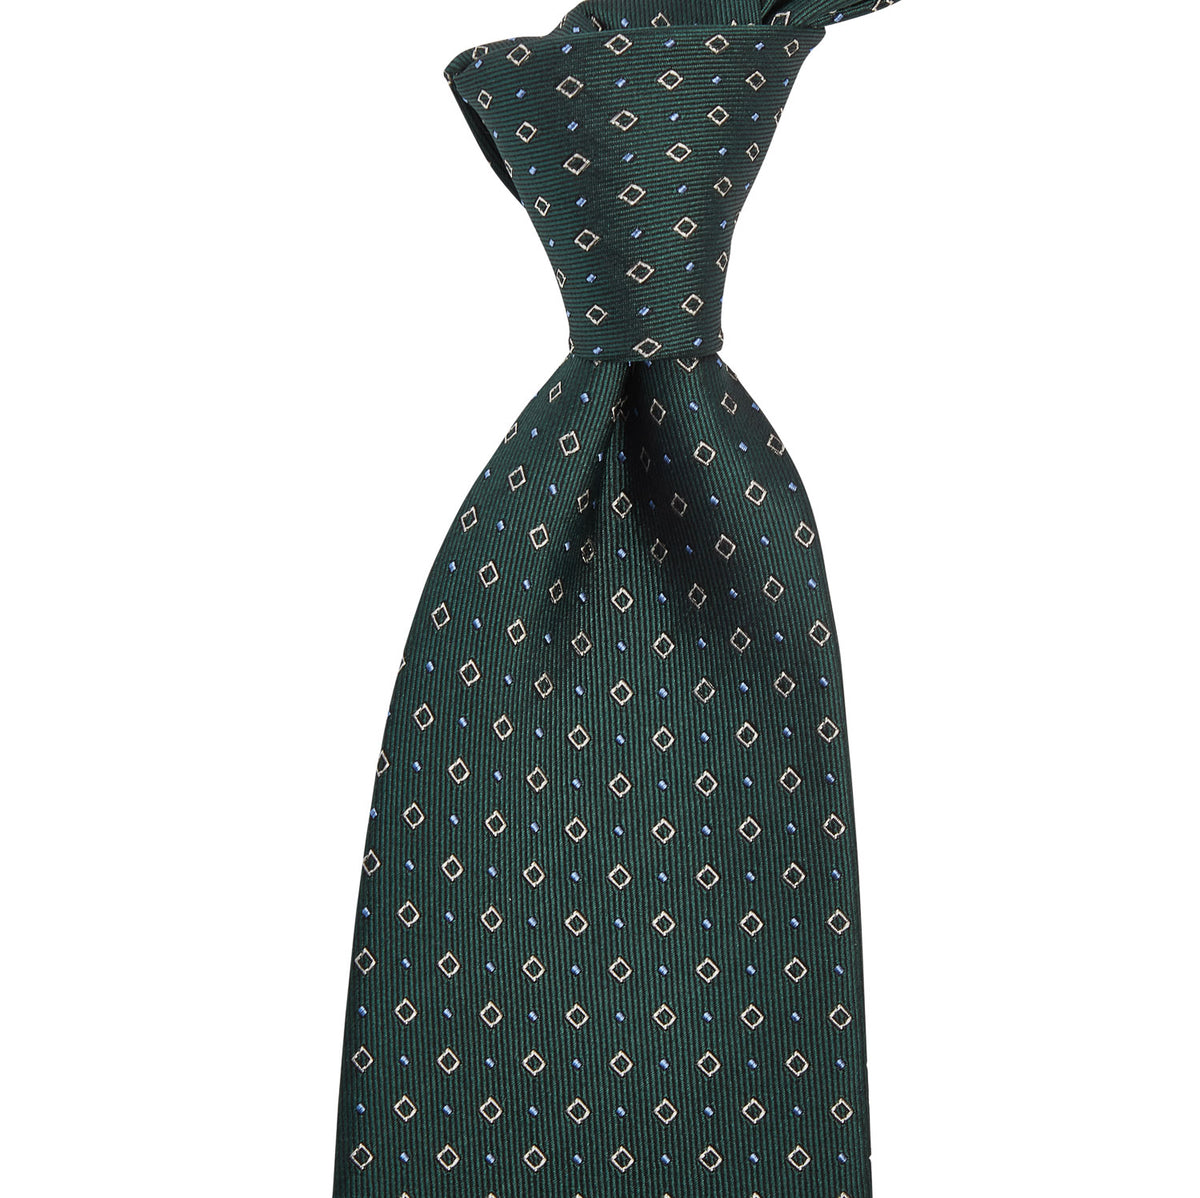 A Sovereign Grade Forest Green Alternating Square Dot Jacquard Tie by KirbyAllison.com in the United Kingdom.